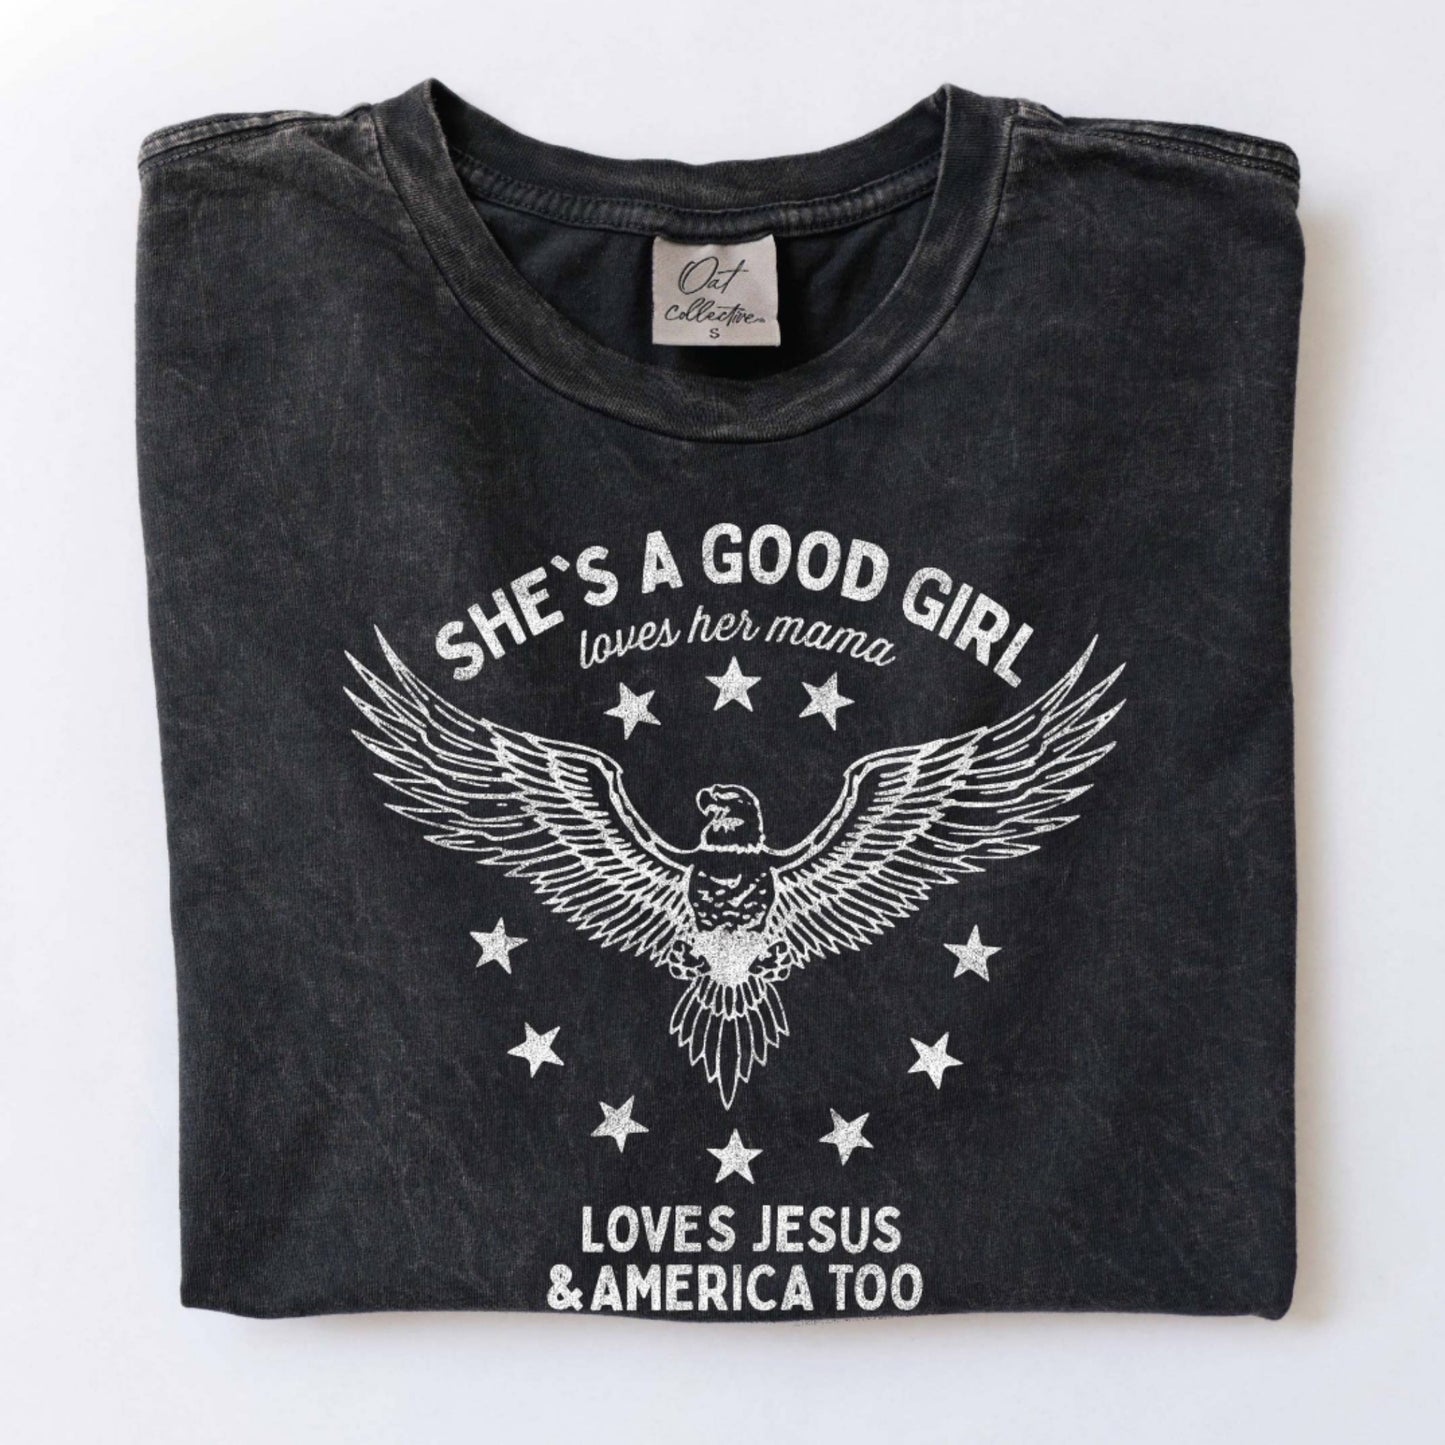 She's a Good Girl! Mineral Washed Graphic Top by Oat Collective - 2 Colors!